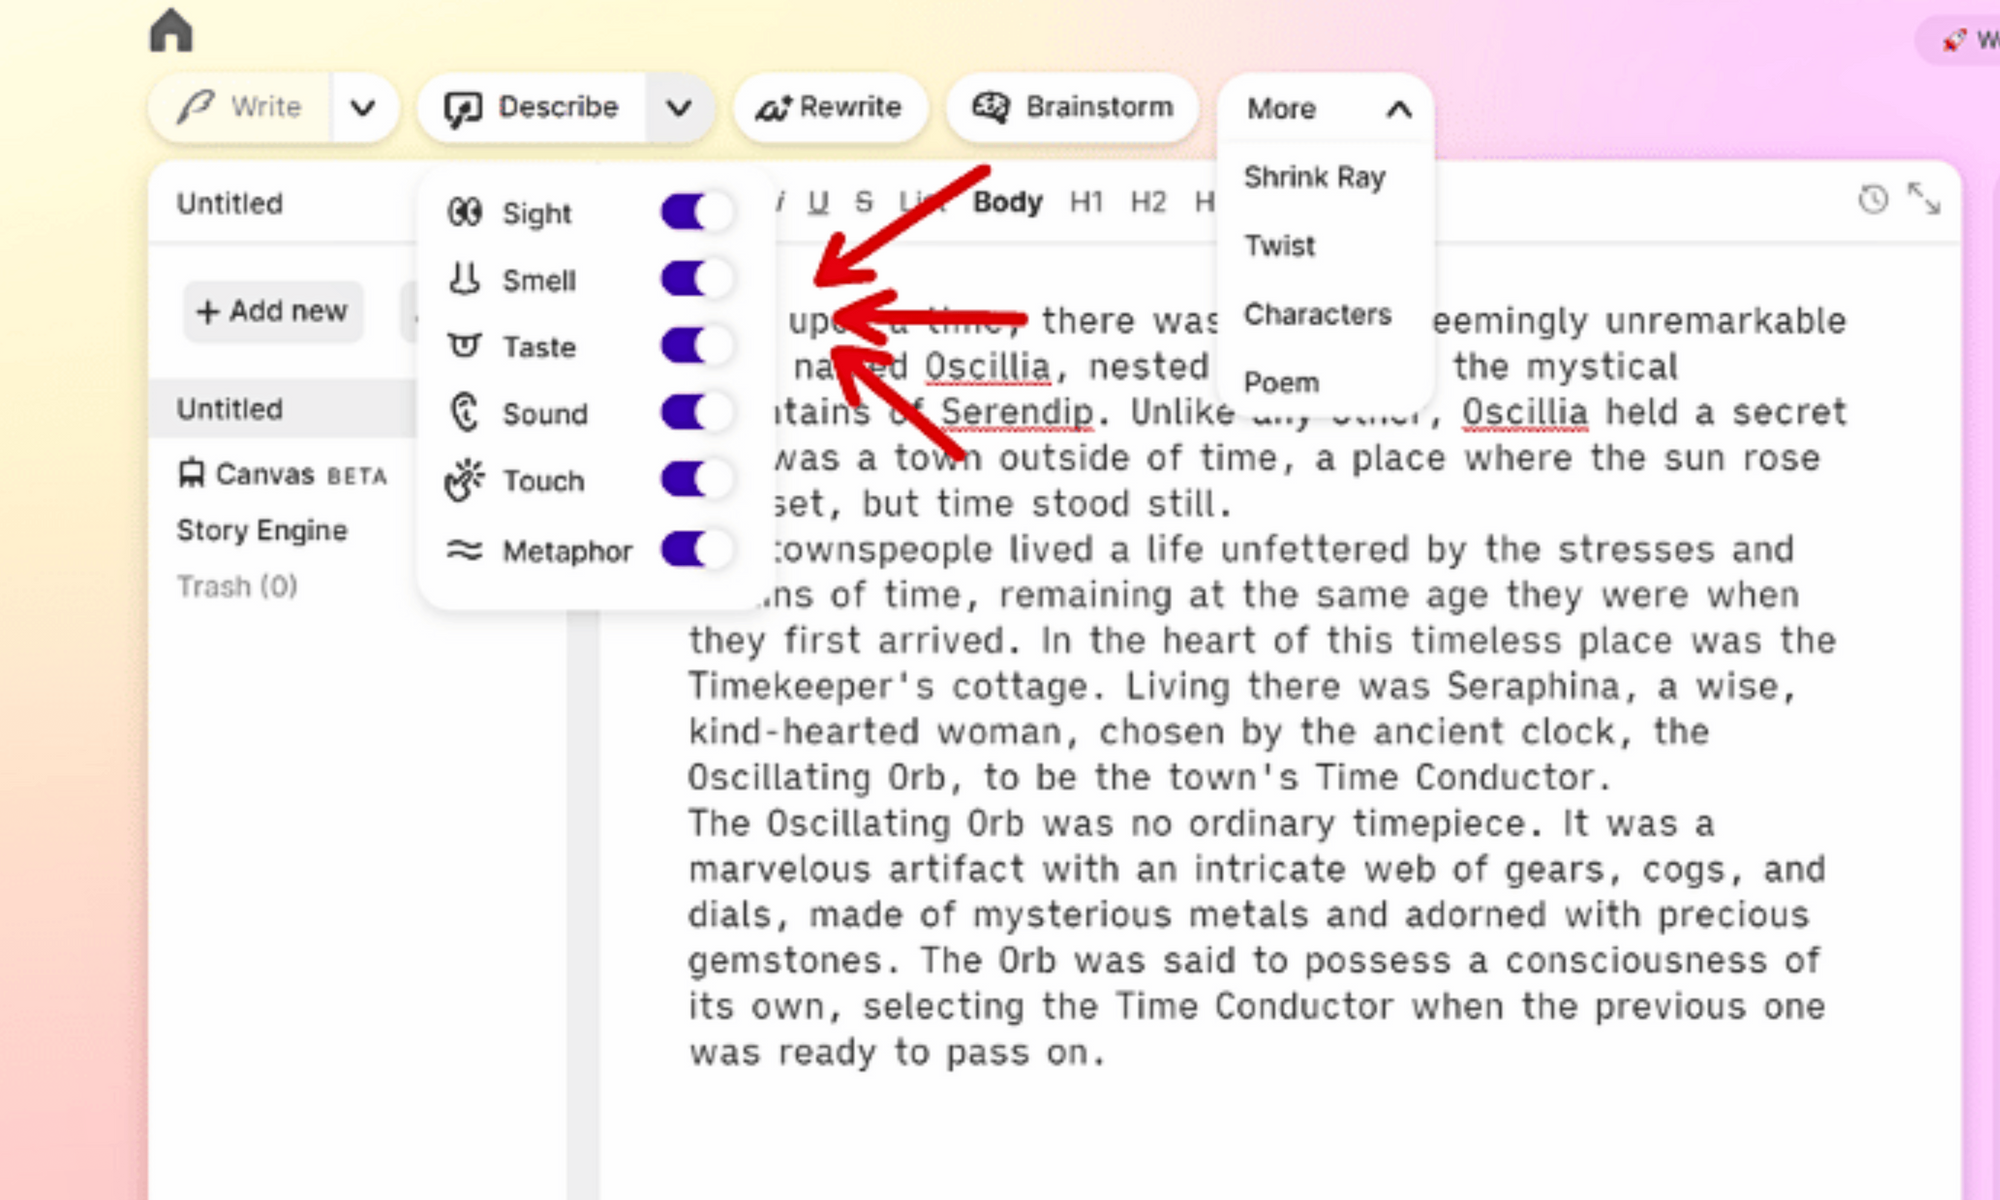 Sudowrite Describe feature, generating rich descriptions for user-inputted topics."